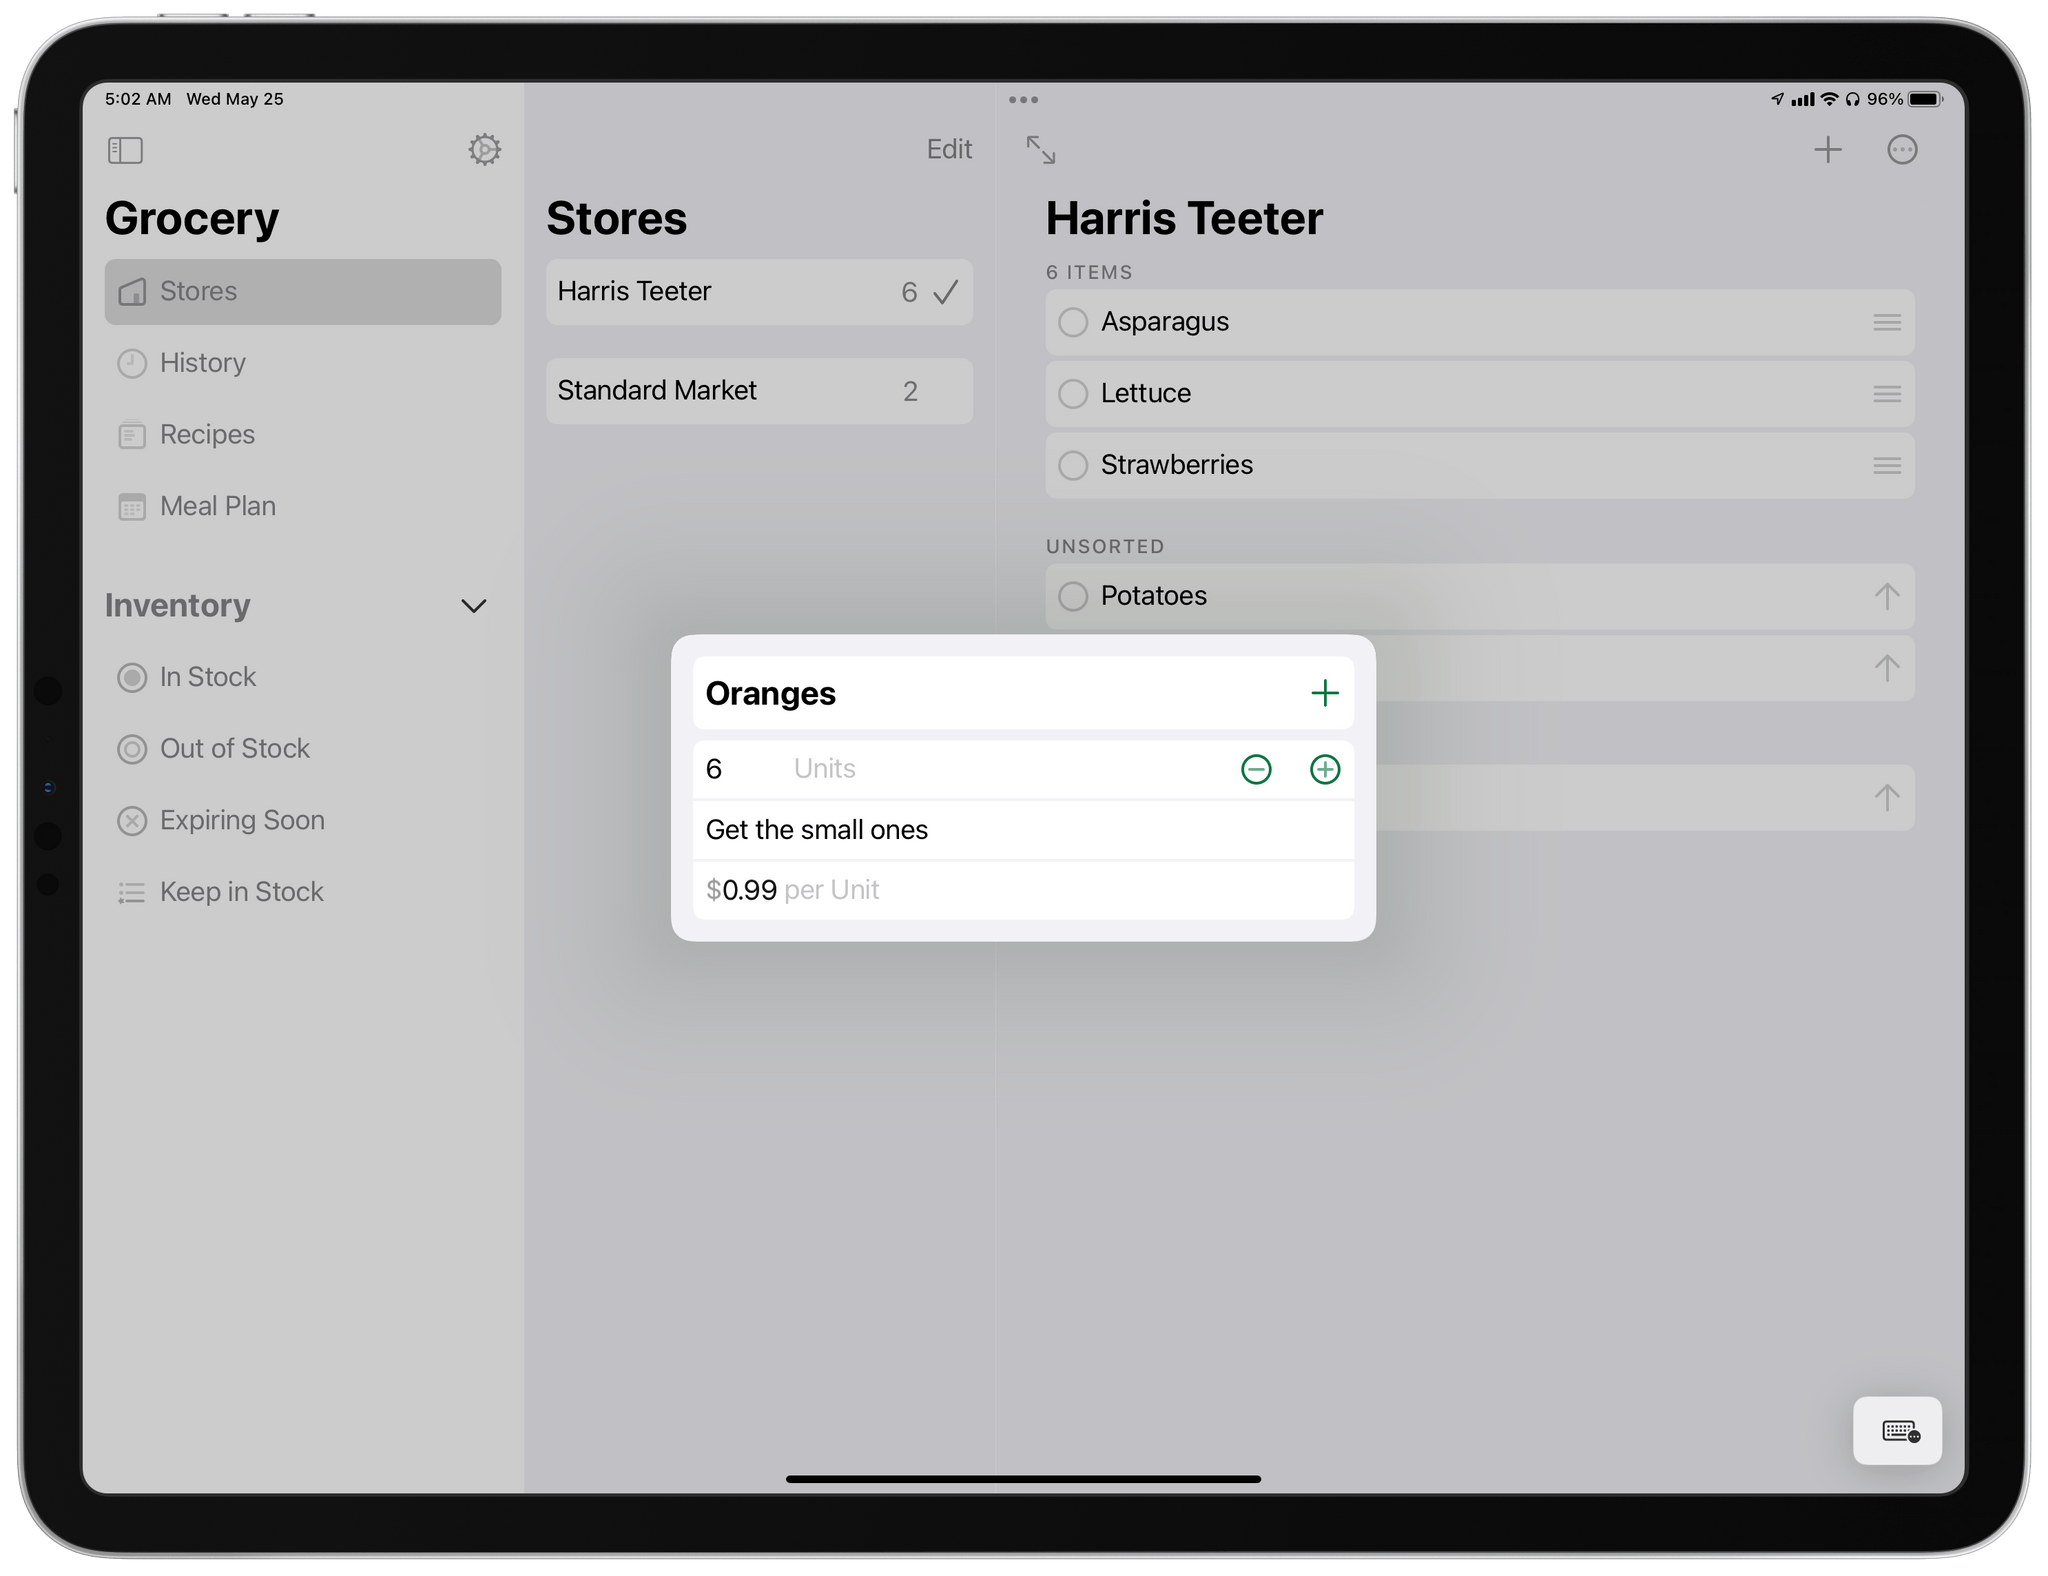 Grocery 3.0 lets you add a number of units, notes, and price to an item, which is reflected in the inventory section.